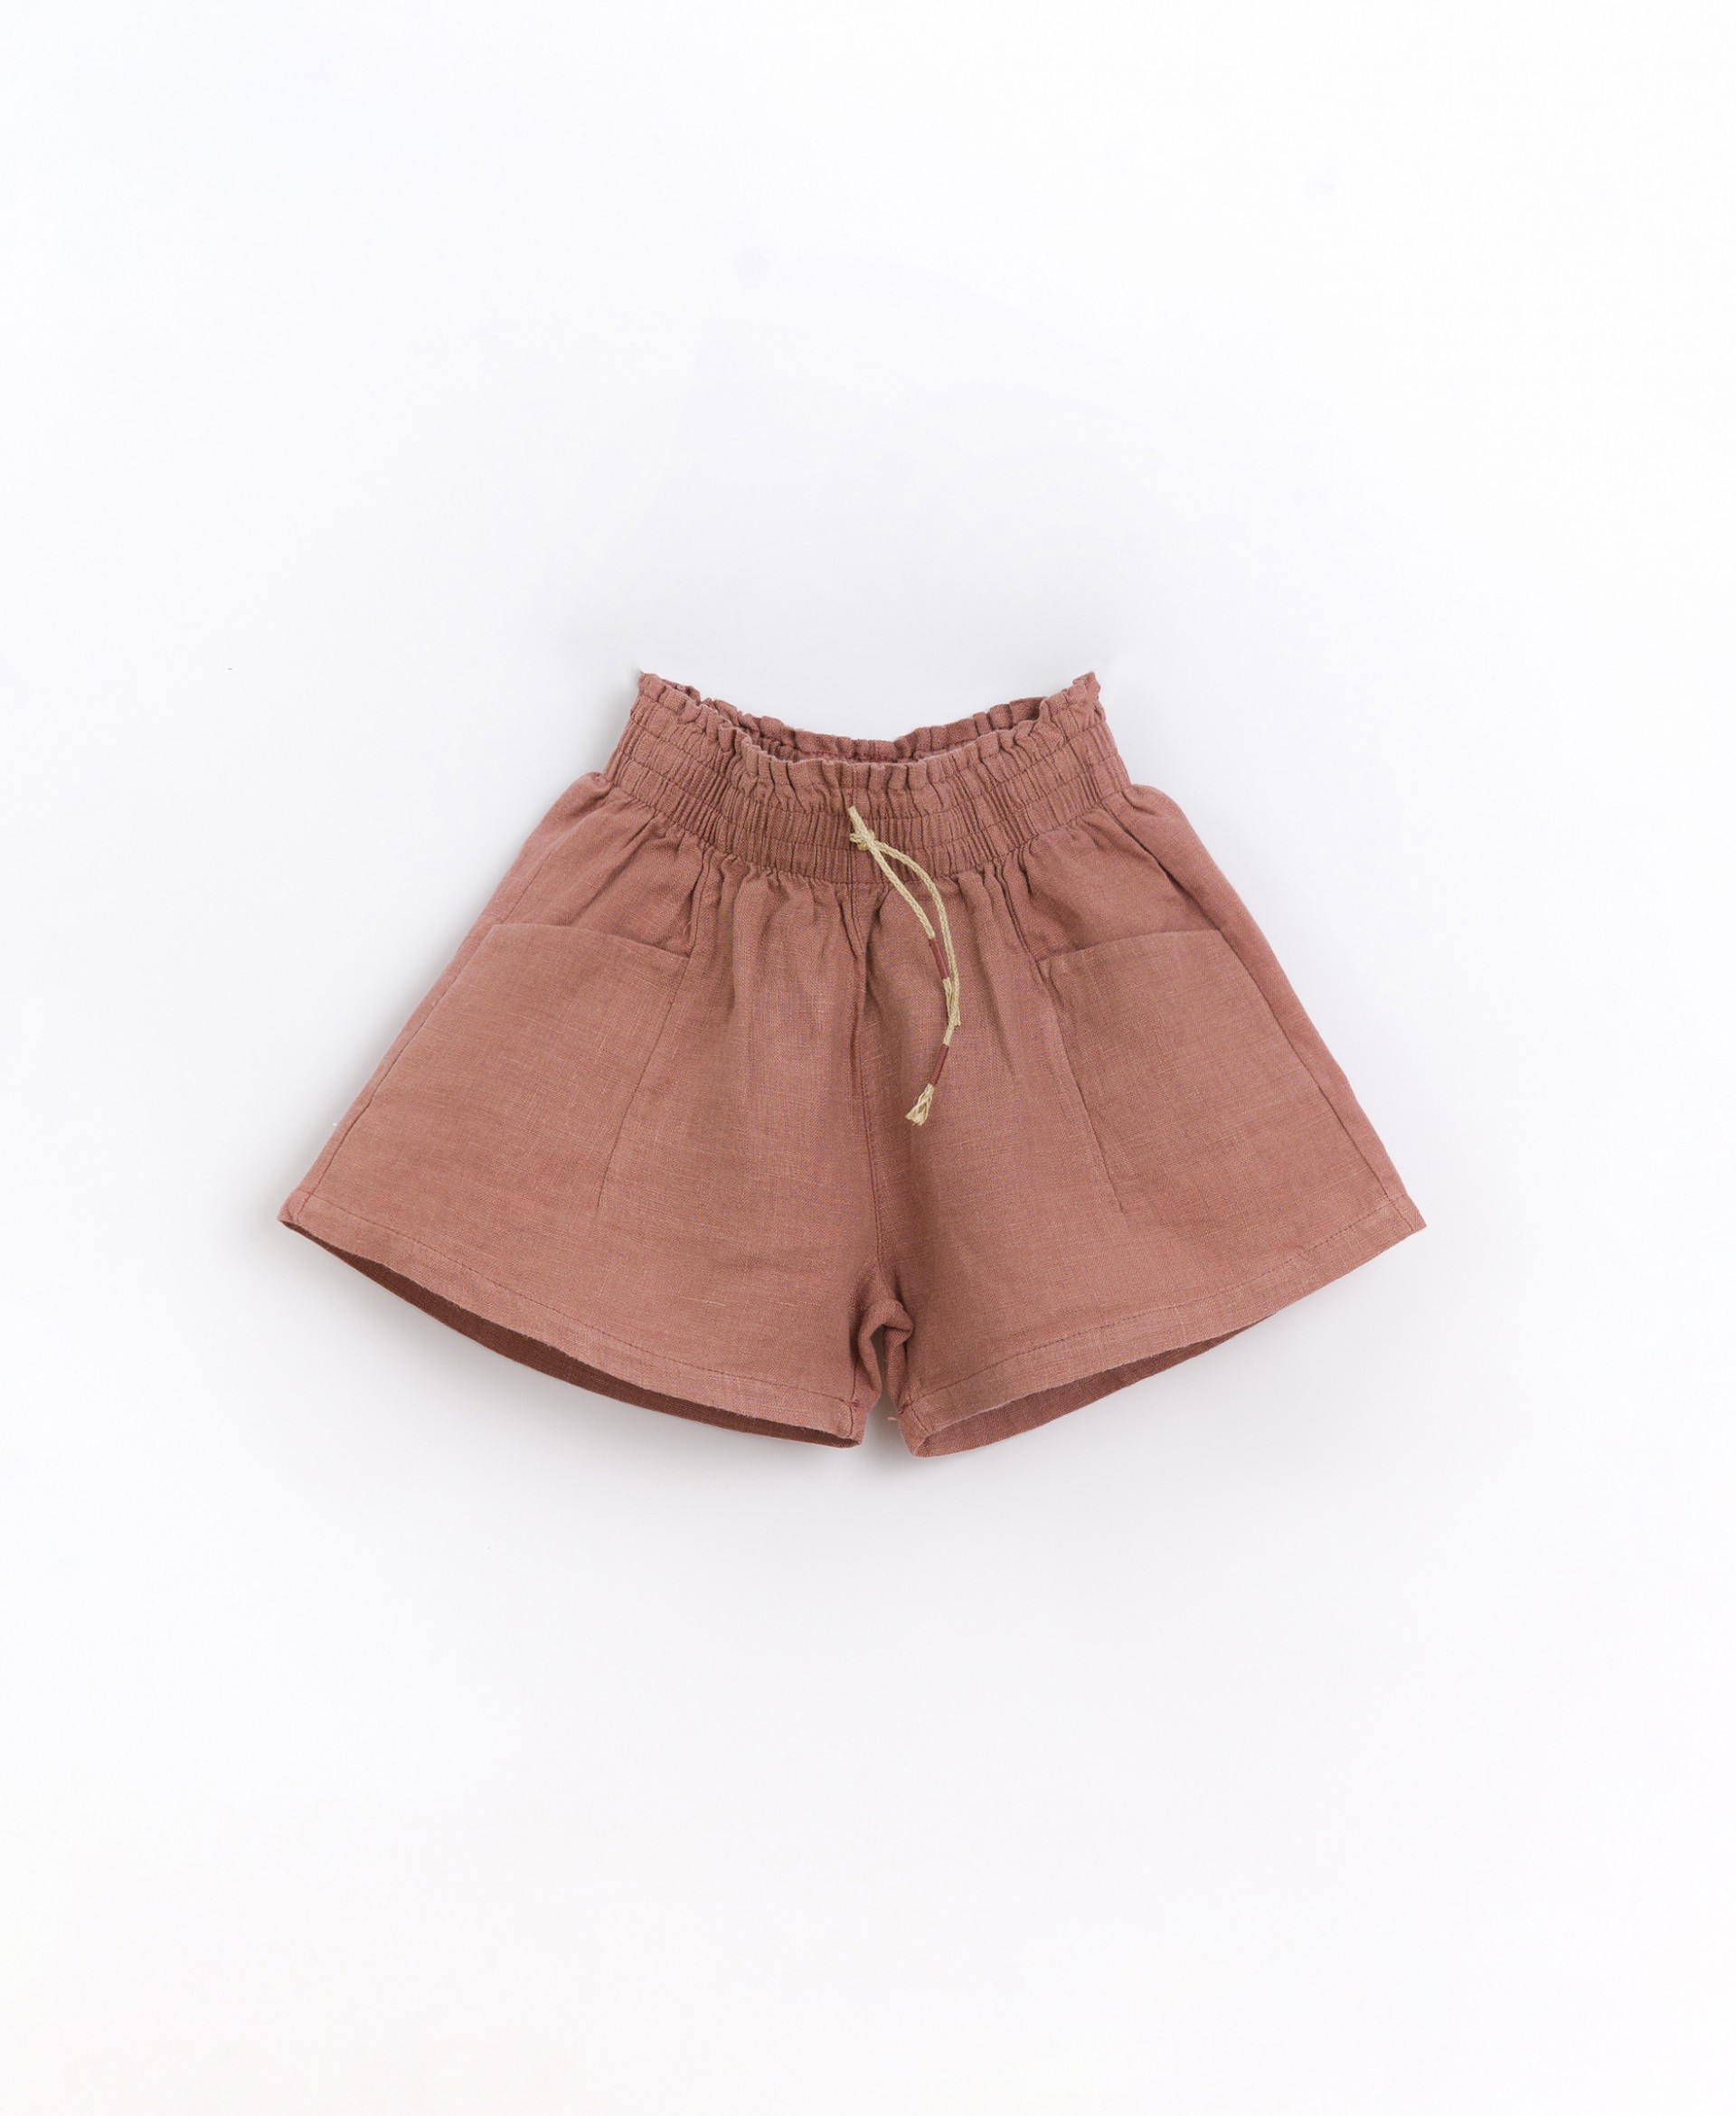 Shorts with pockets and decorative drawstring | Basketry